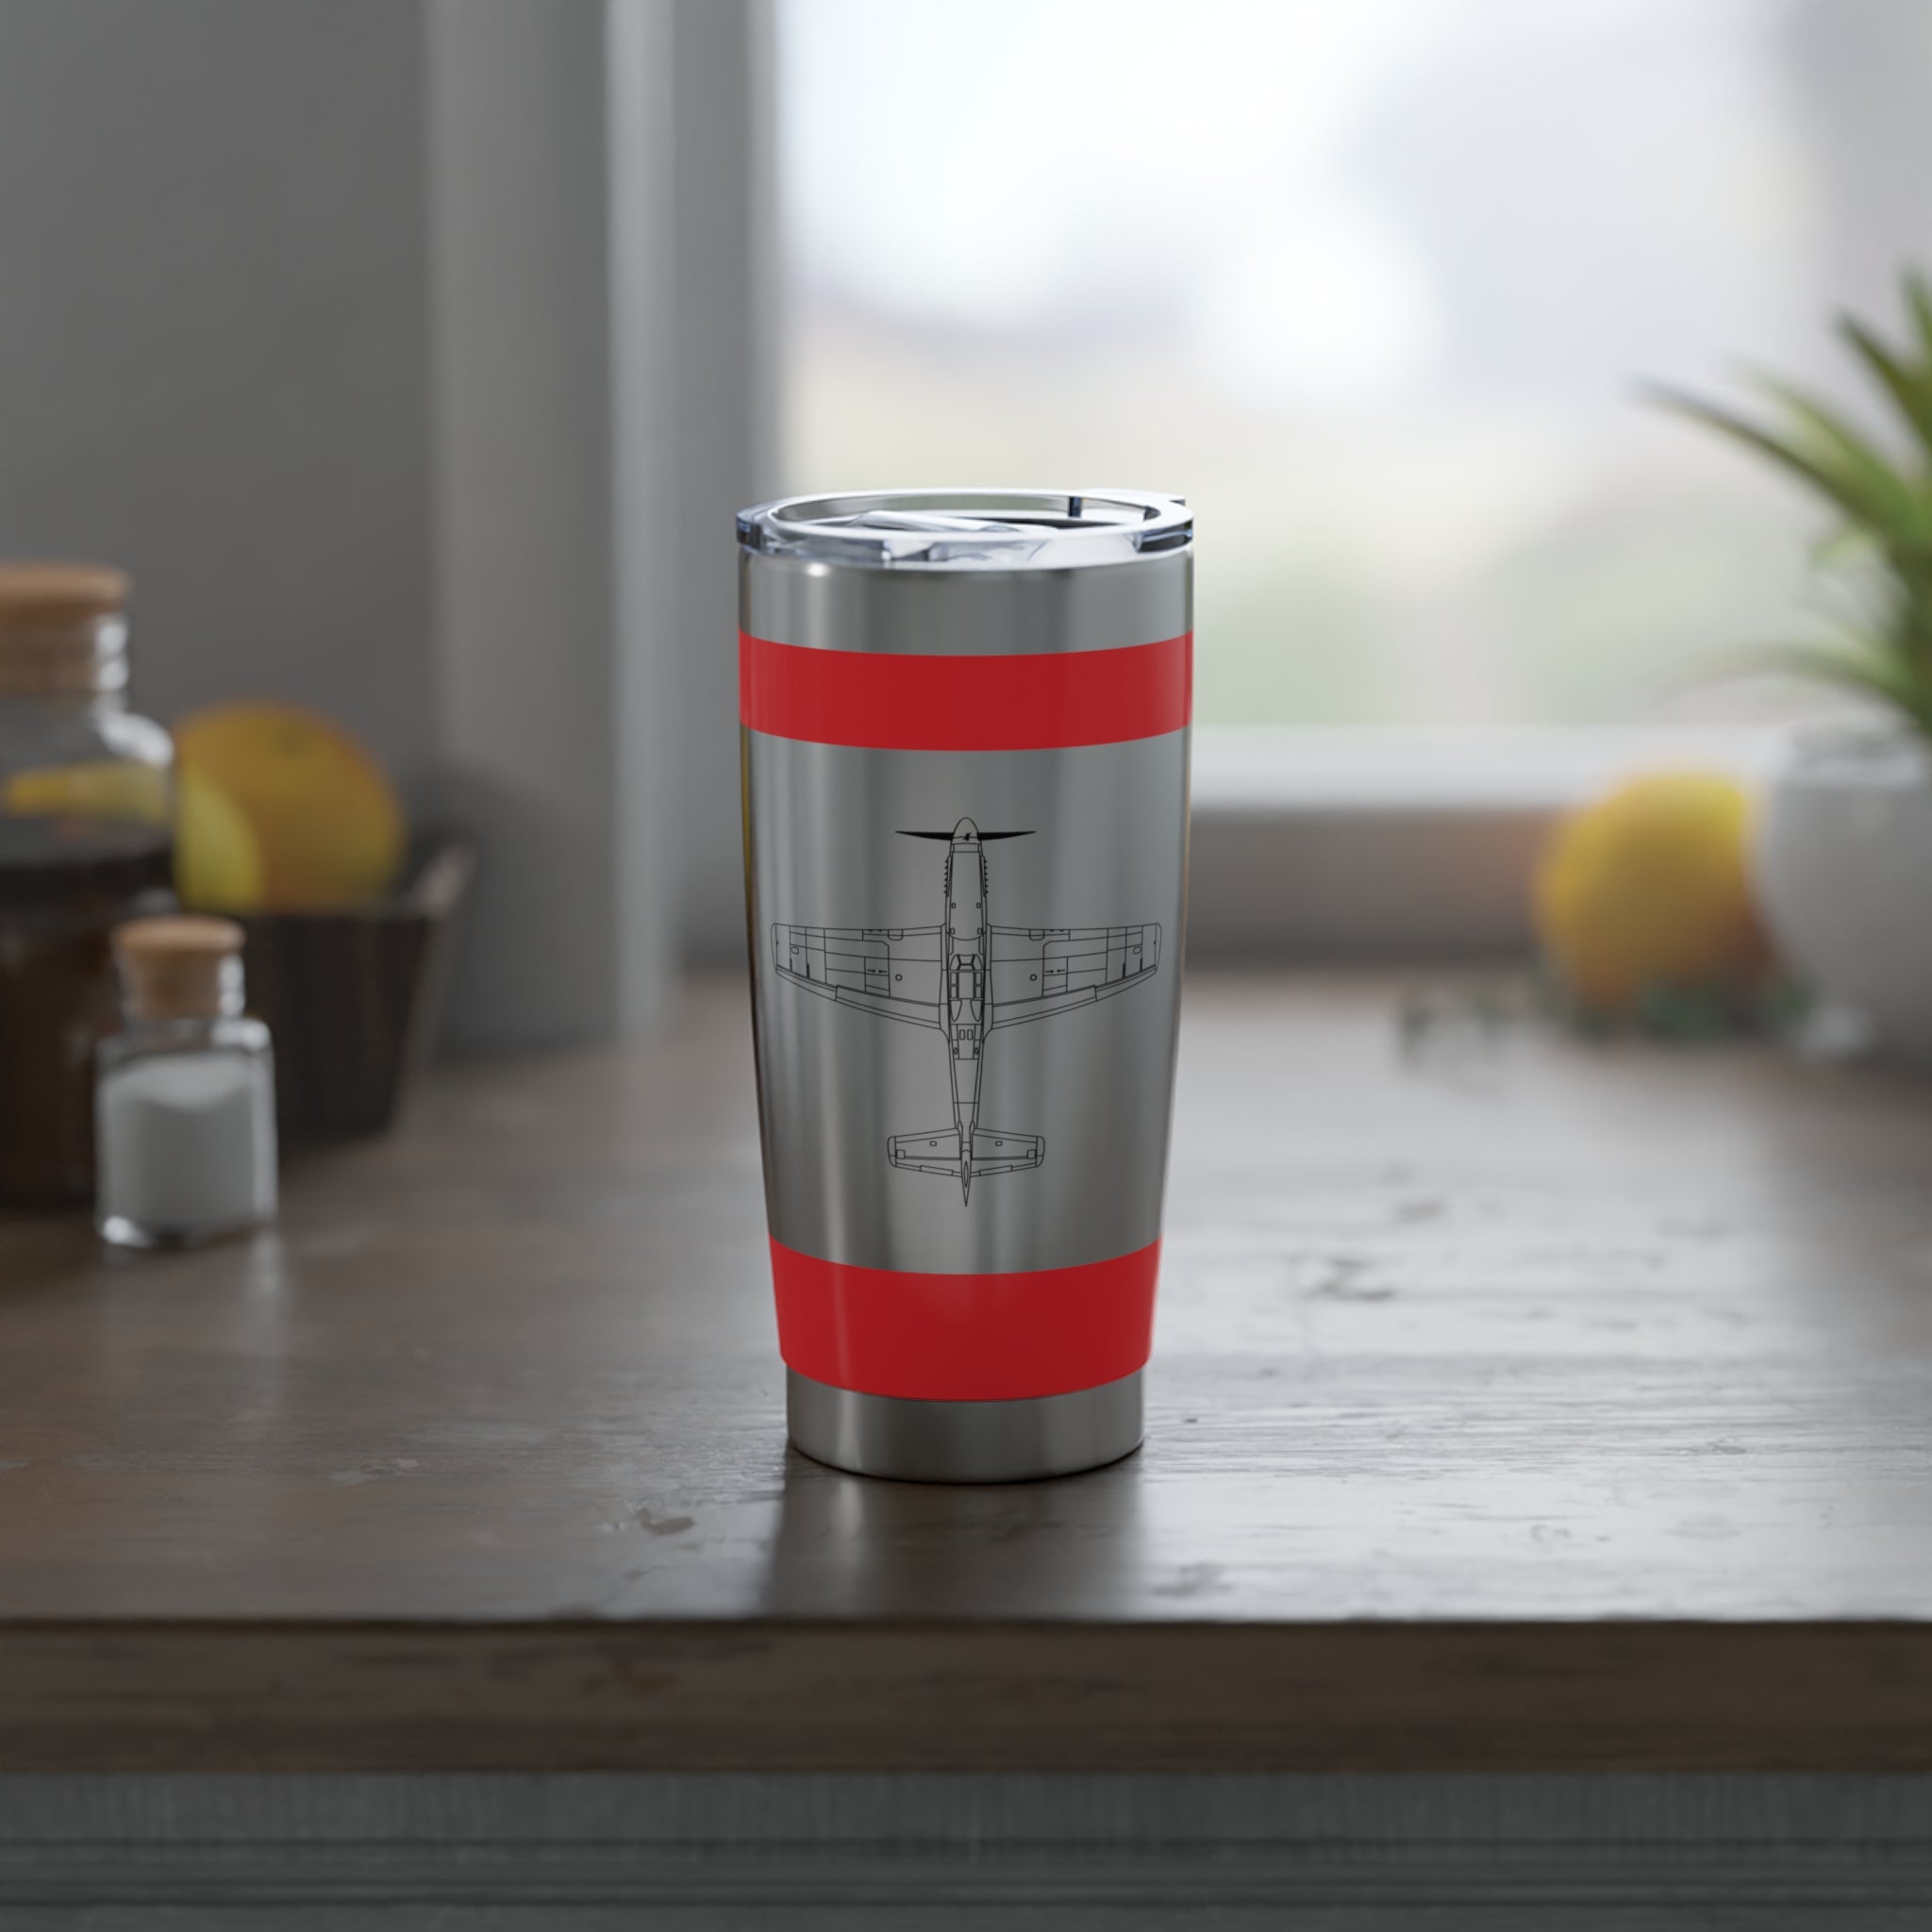 P-51 "By ReQuest" Inspired 20oz (590ml) Stainless Steel Tumbler - I Love a Hangar